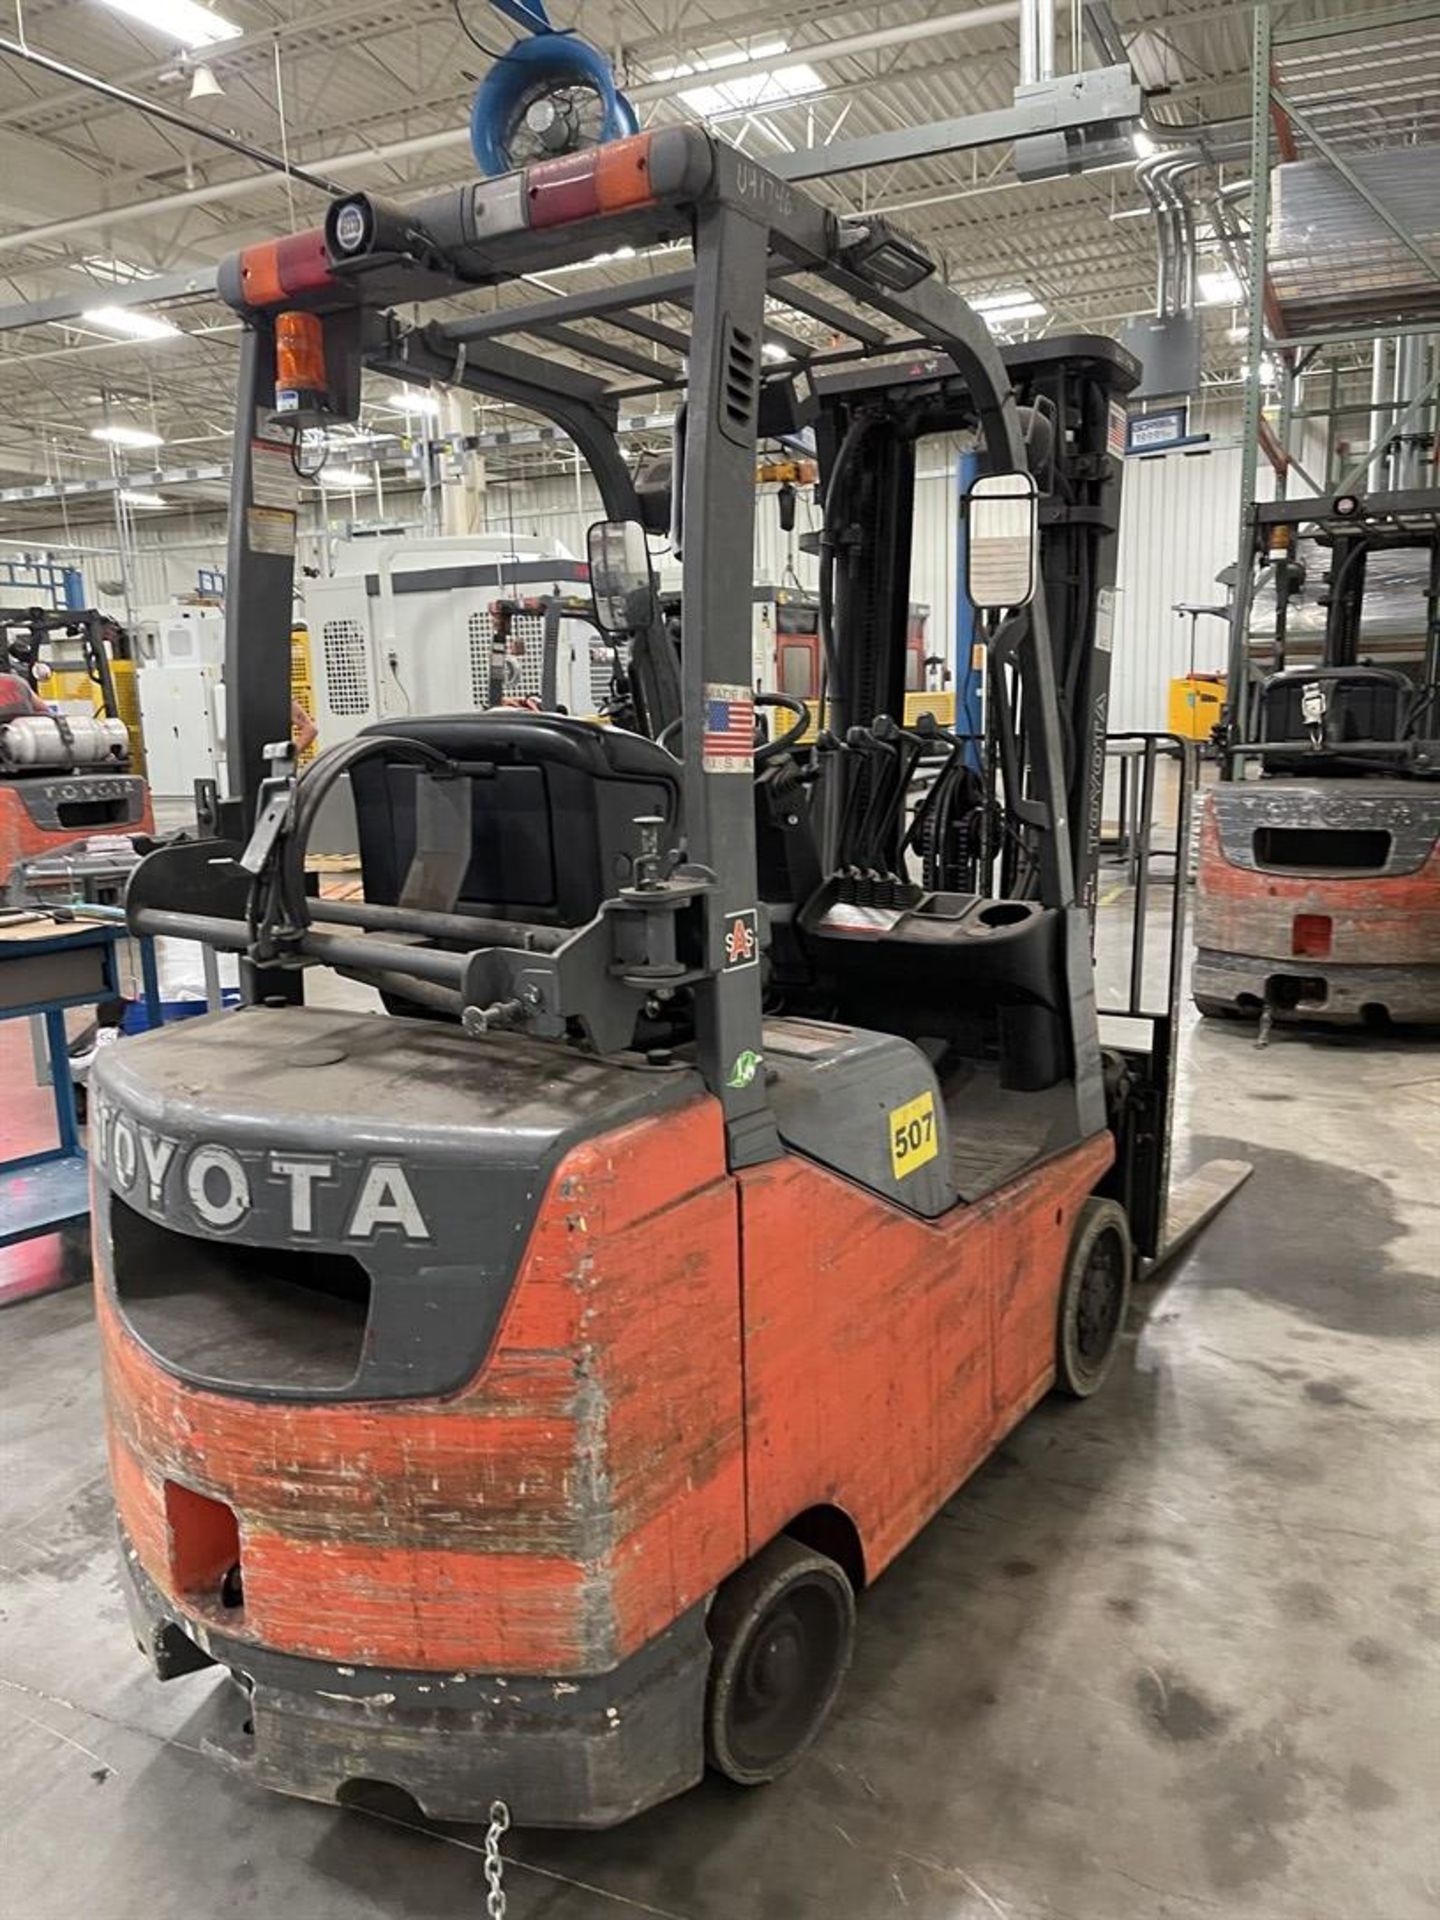 TOYOTA 8FGCSU20 LP Forklift, s/n 11128, 4,000 Lb. Capacity, Side Shift, 3-Stage Mast, Cushion - Image 4 of 6